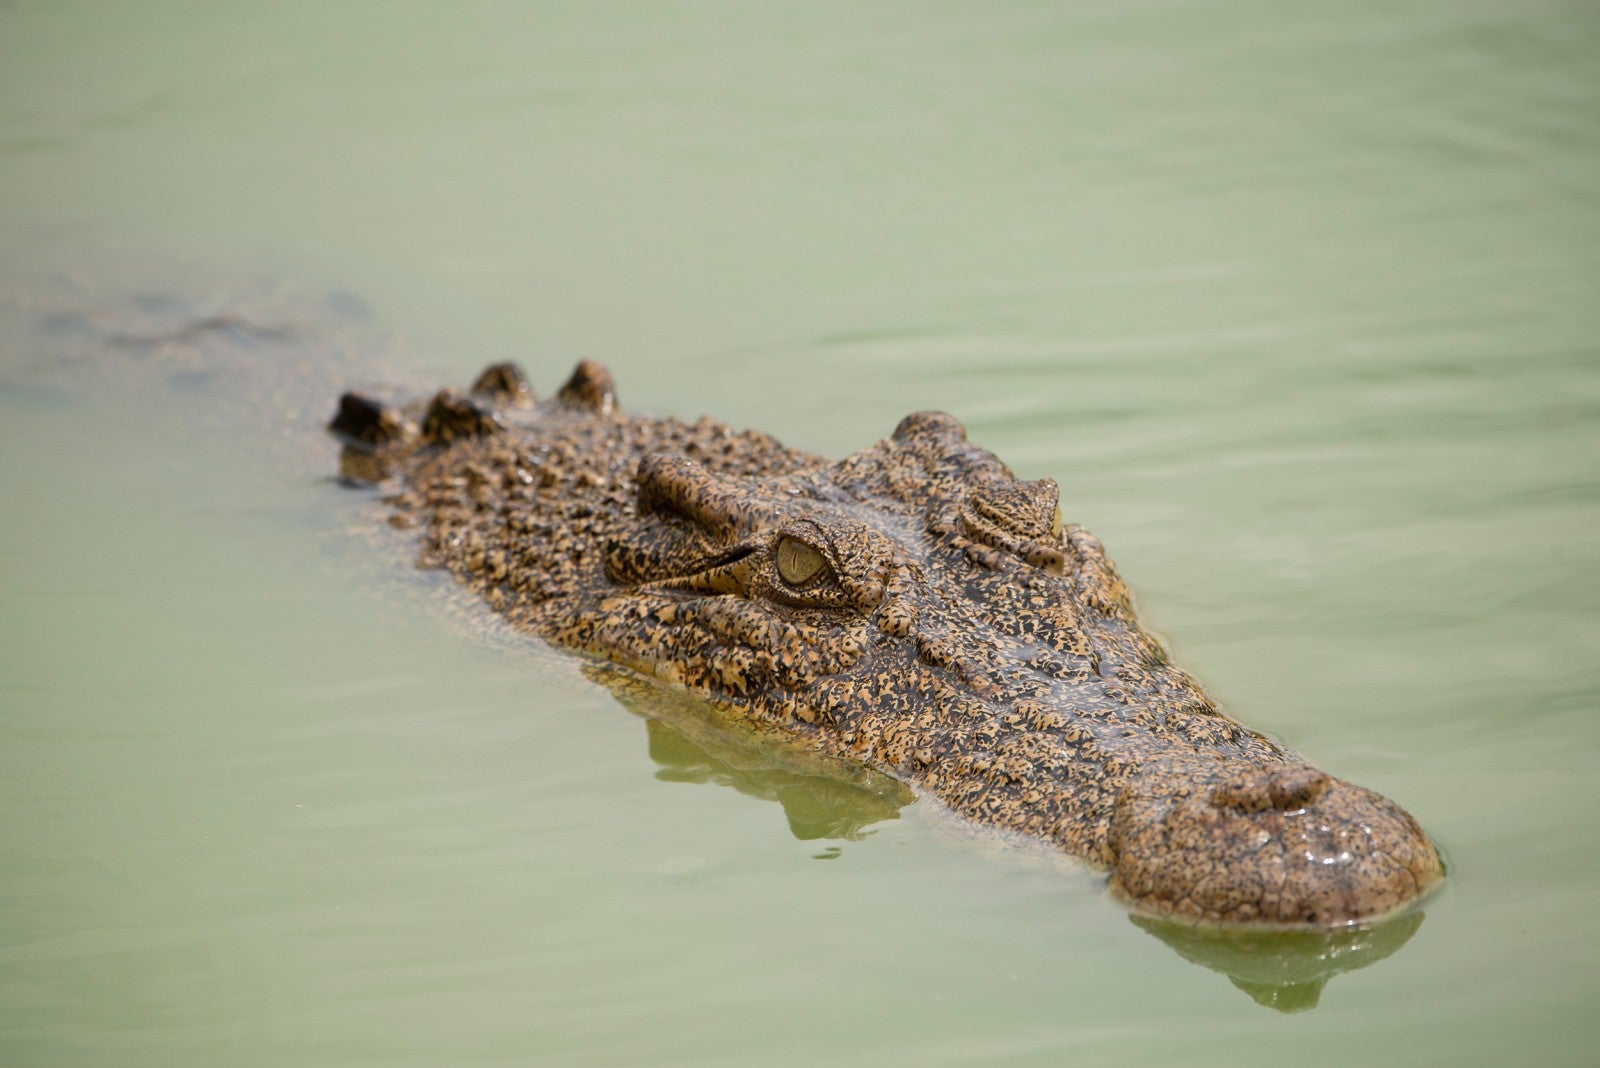 Govt Issues Public Safety Alert As Somebody Dumped A Crocodile Into Shah Alam Lake - WORLD OF BUZZ 1